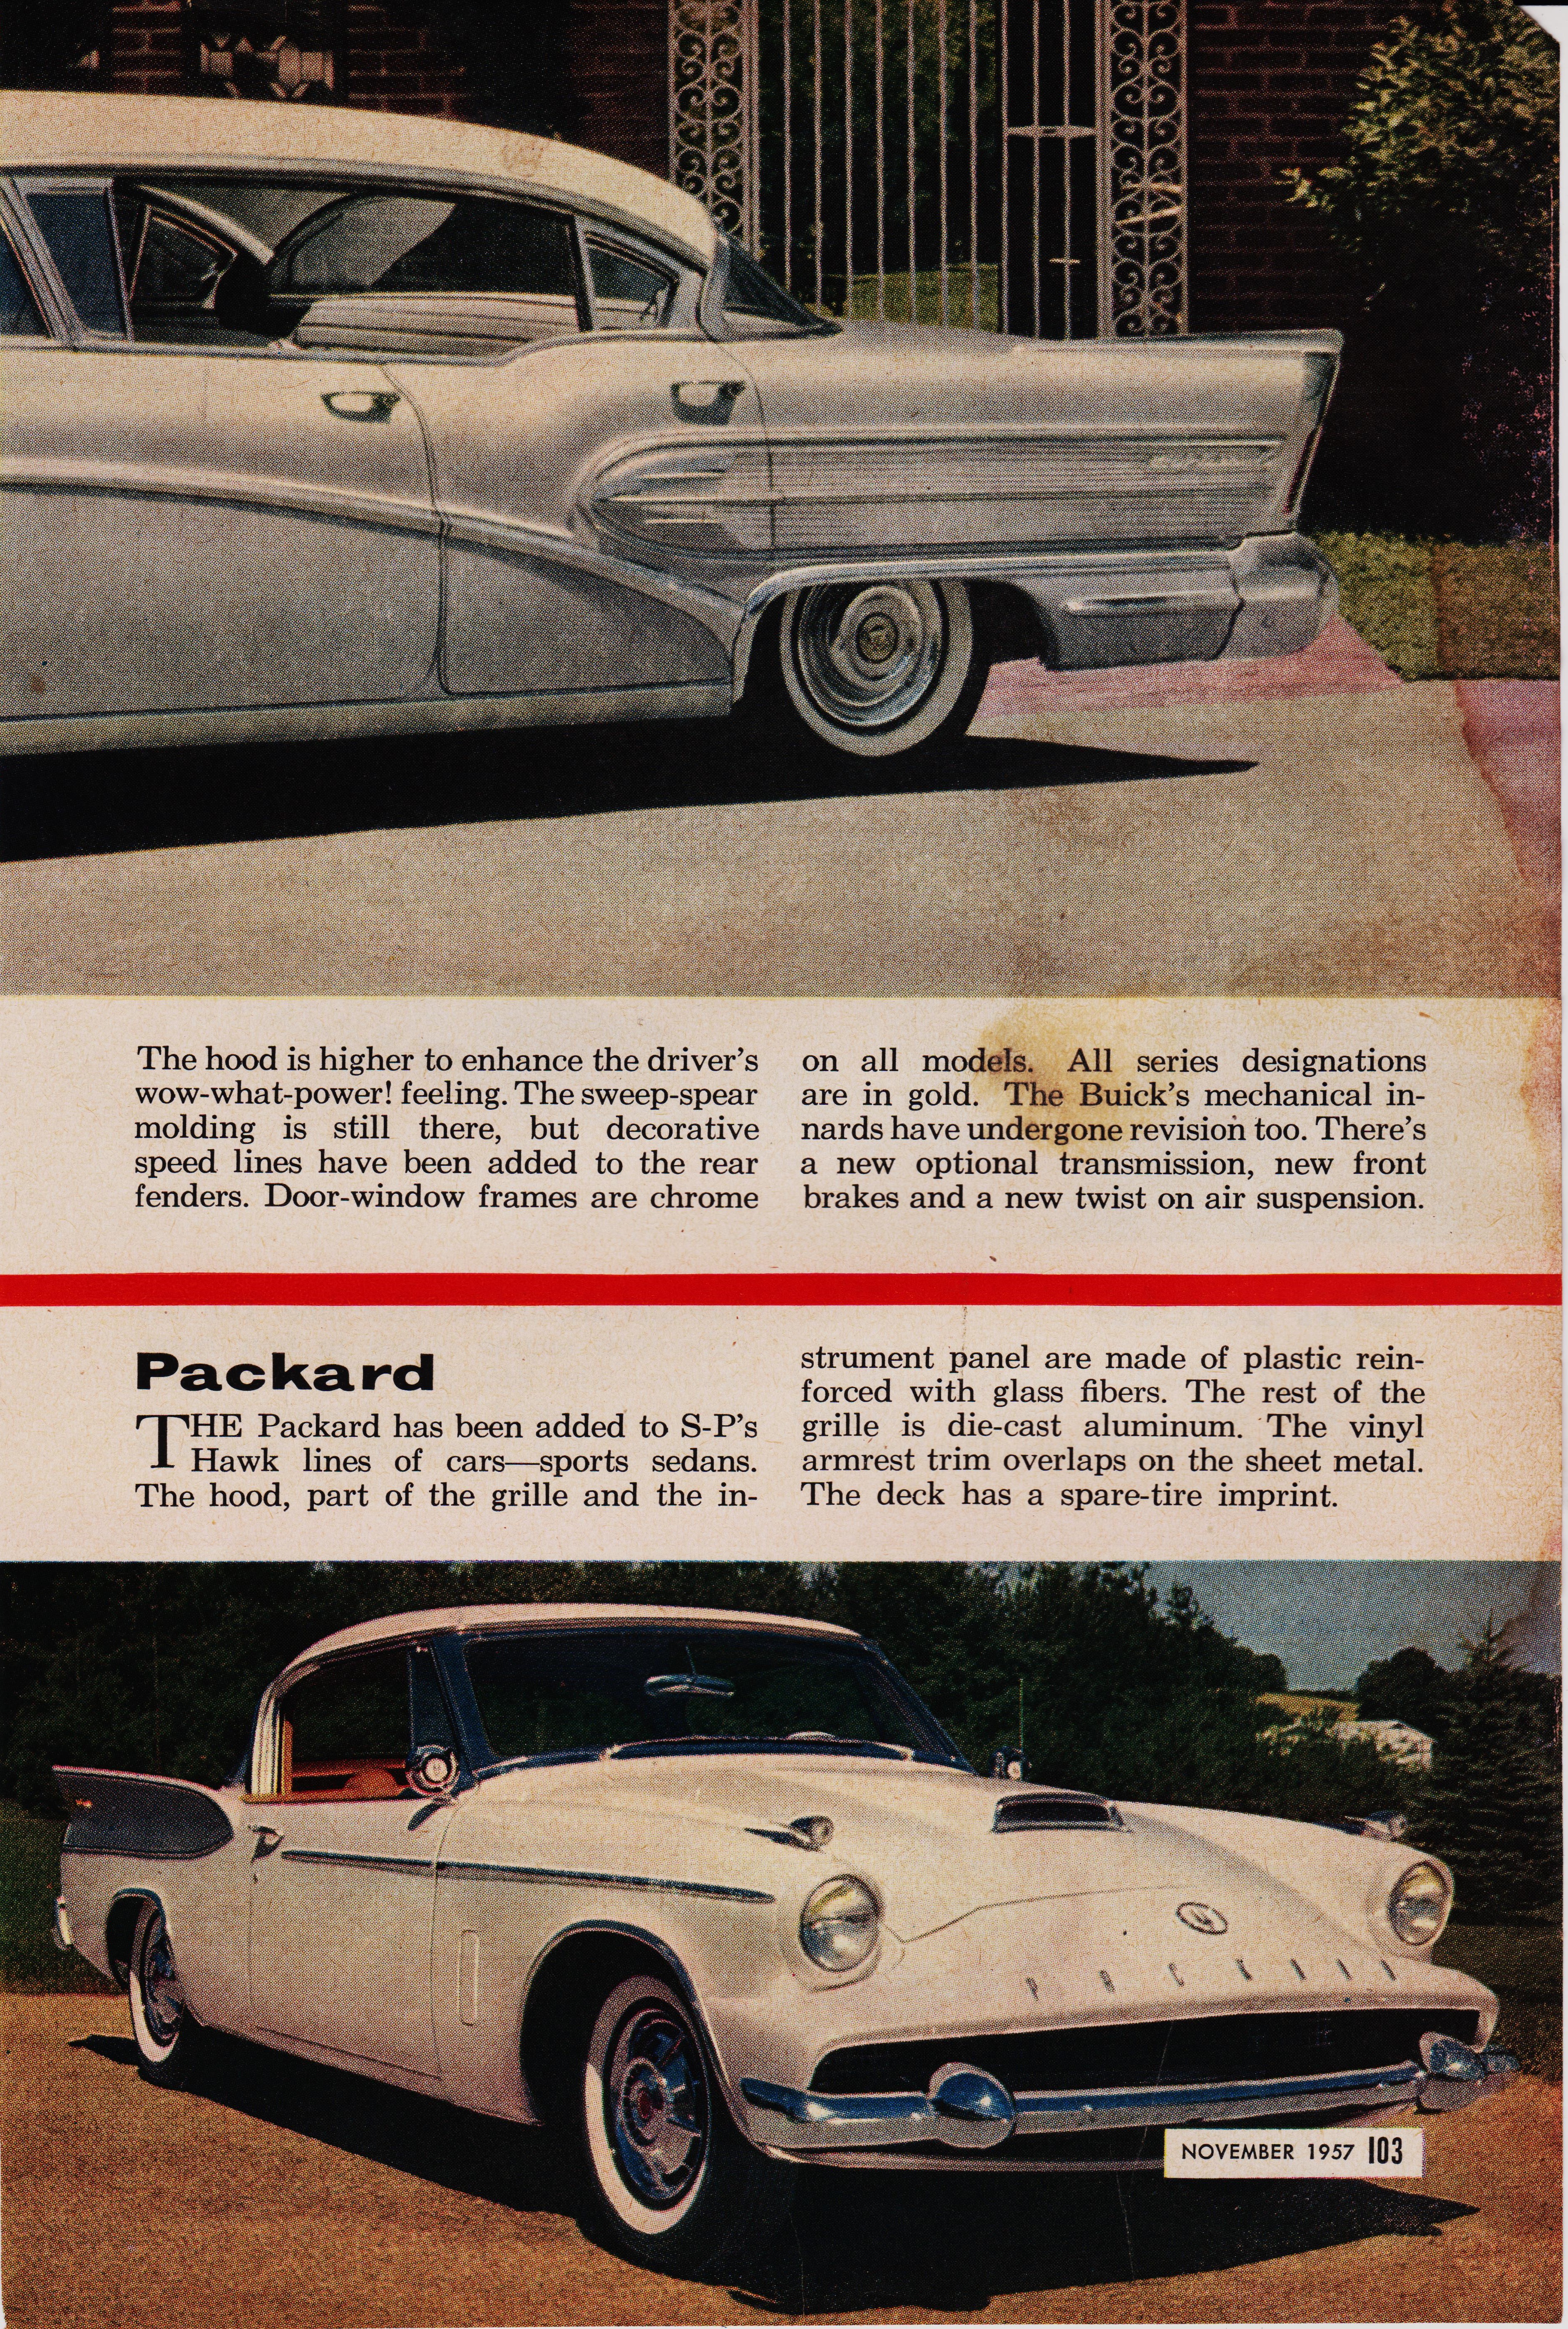 https://antiquemachinery.com/images-Popular-Science/Scientific-American-1958-Cars-DeSoto-Crysler-Imperial-Dodge-f.jpeg